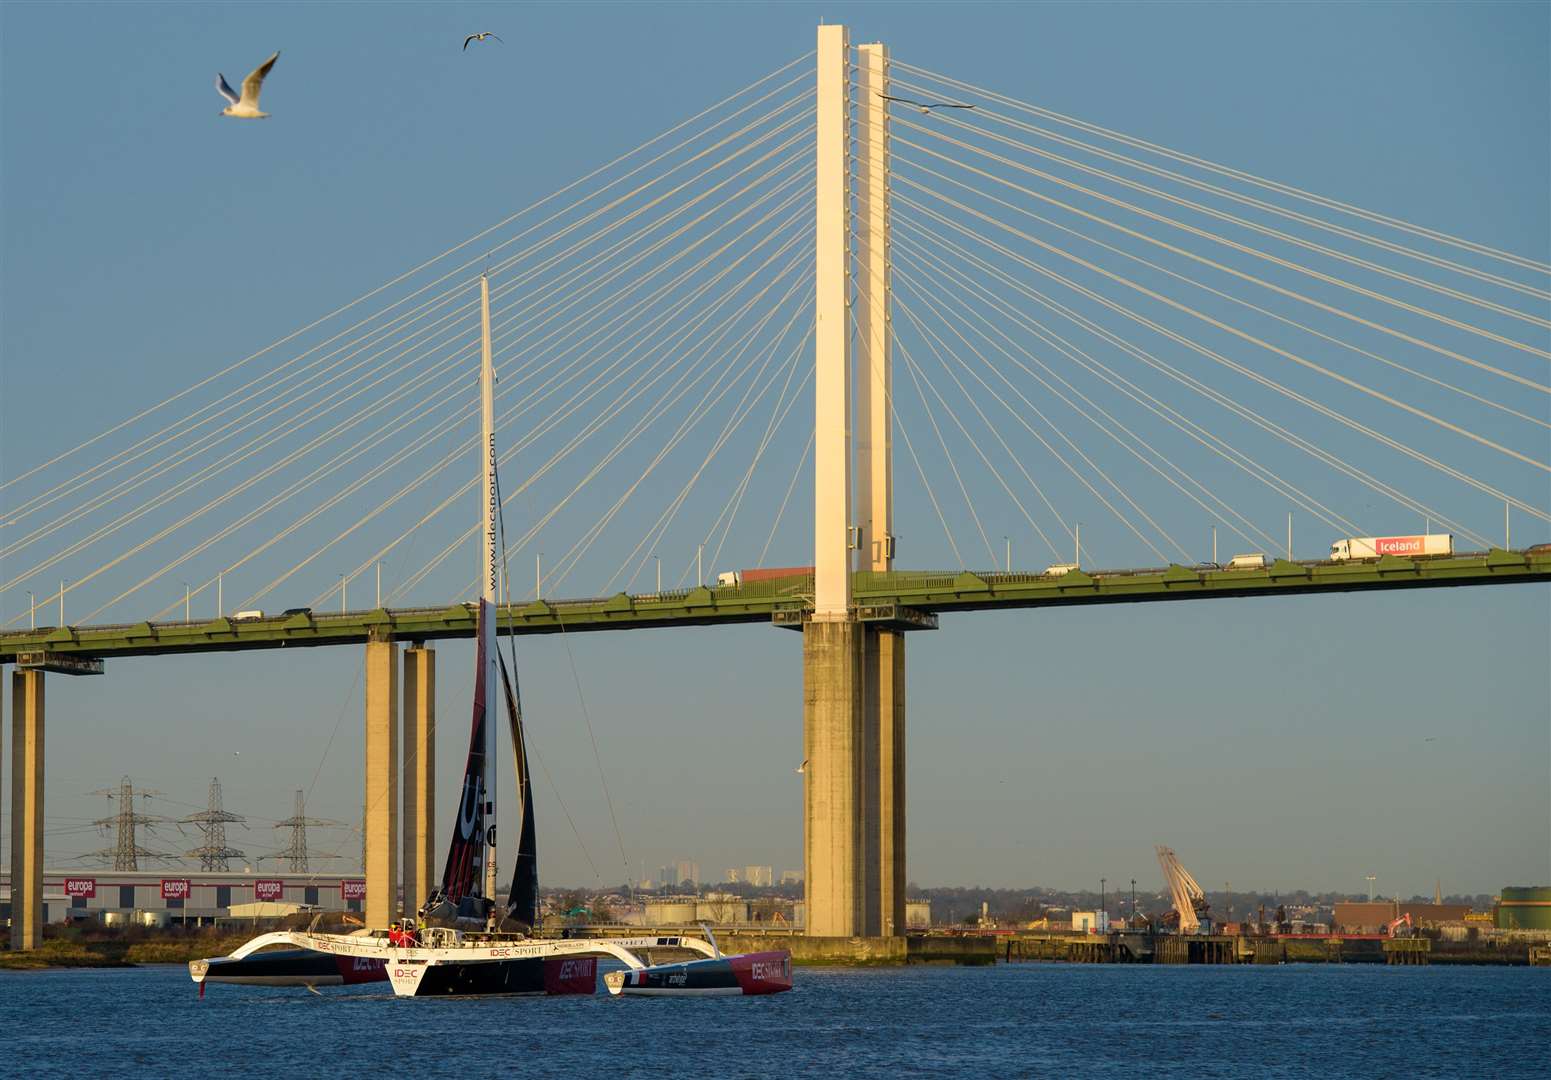 The Dartford Crossing now regularly sees 180,000 journeys a day. Photo: Anthony Upton/Alea